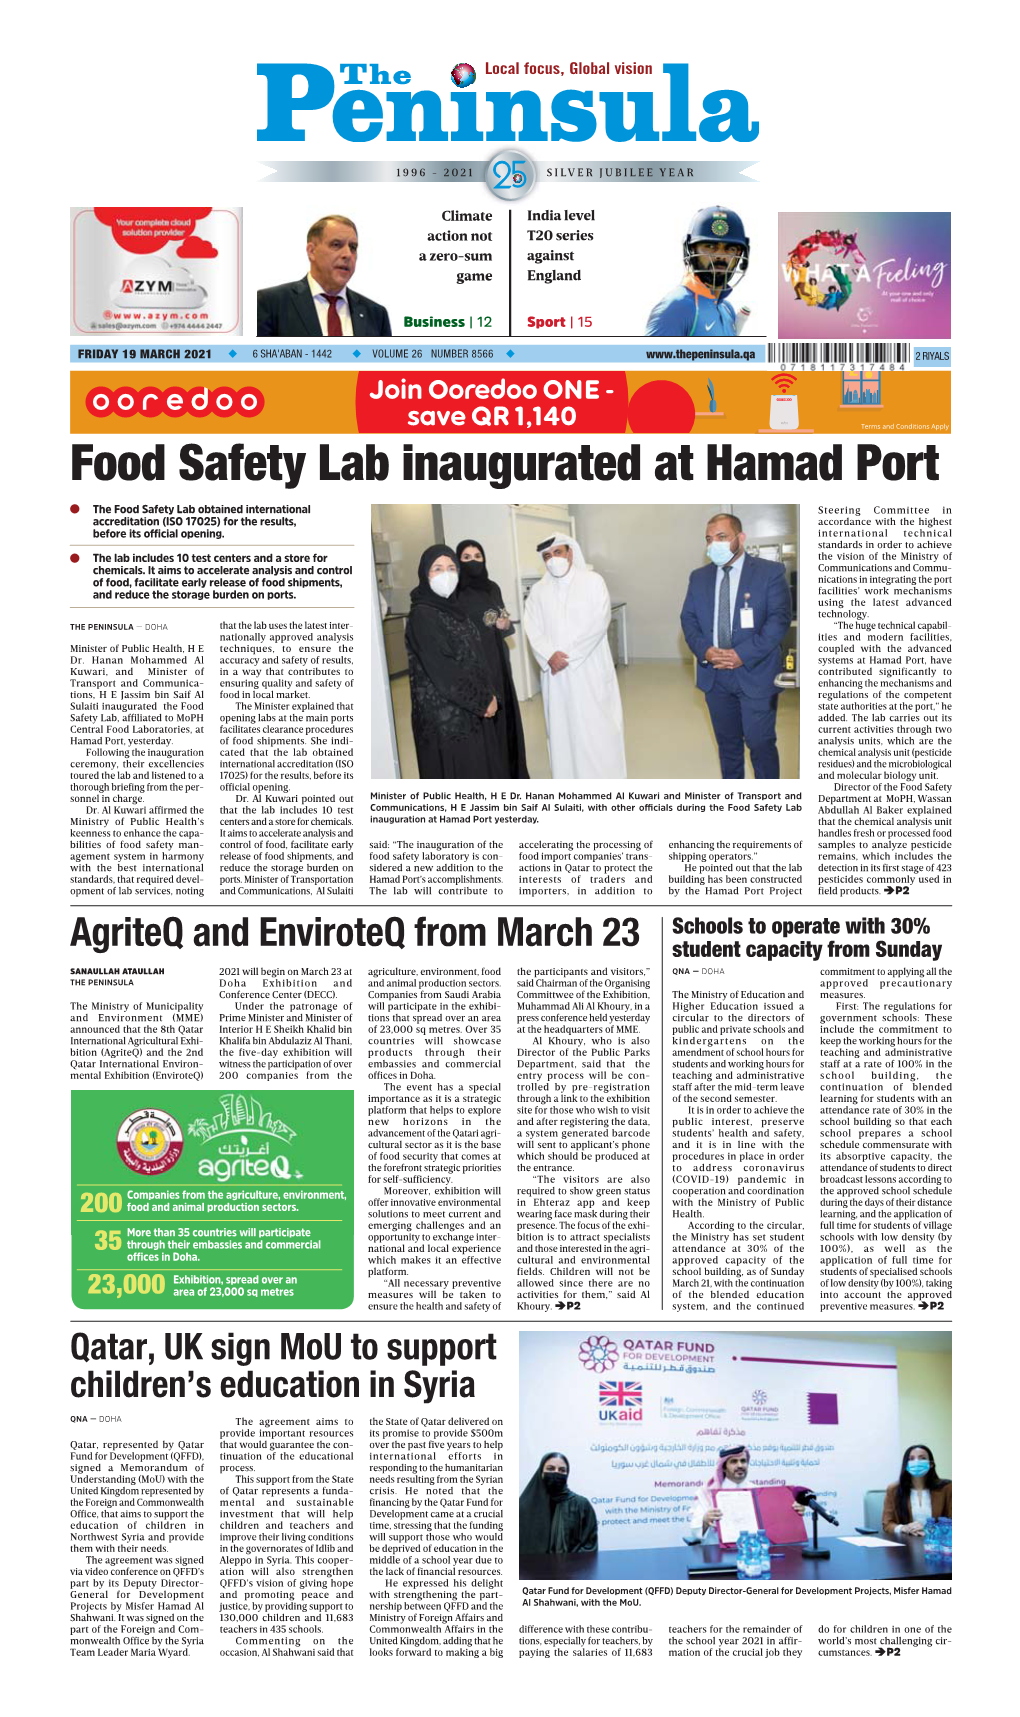 Food Safety Lab Inaugurated at Hamad Port